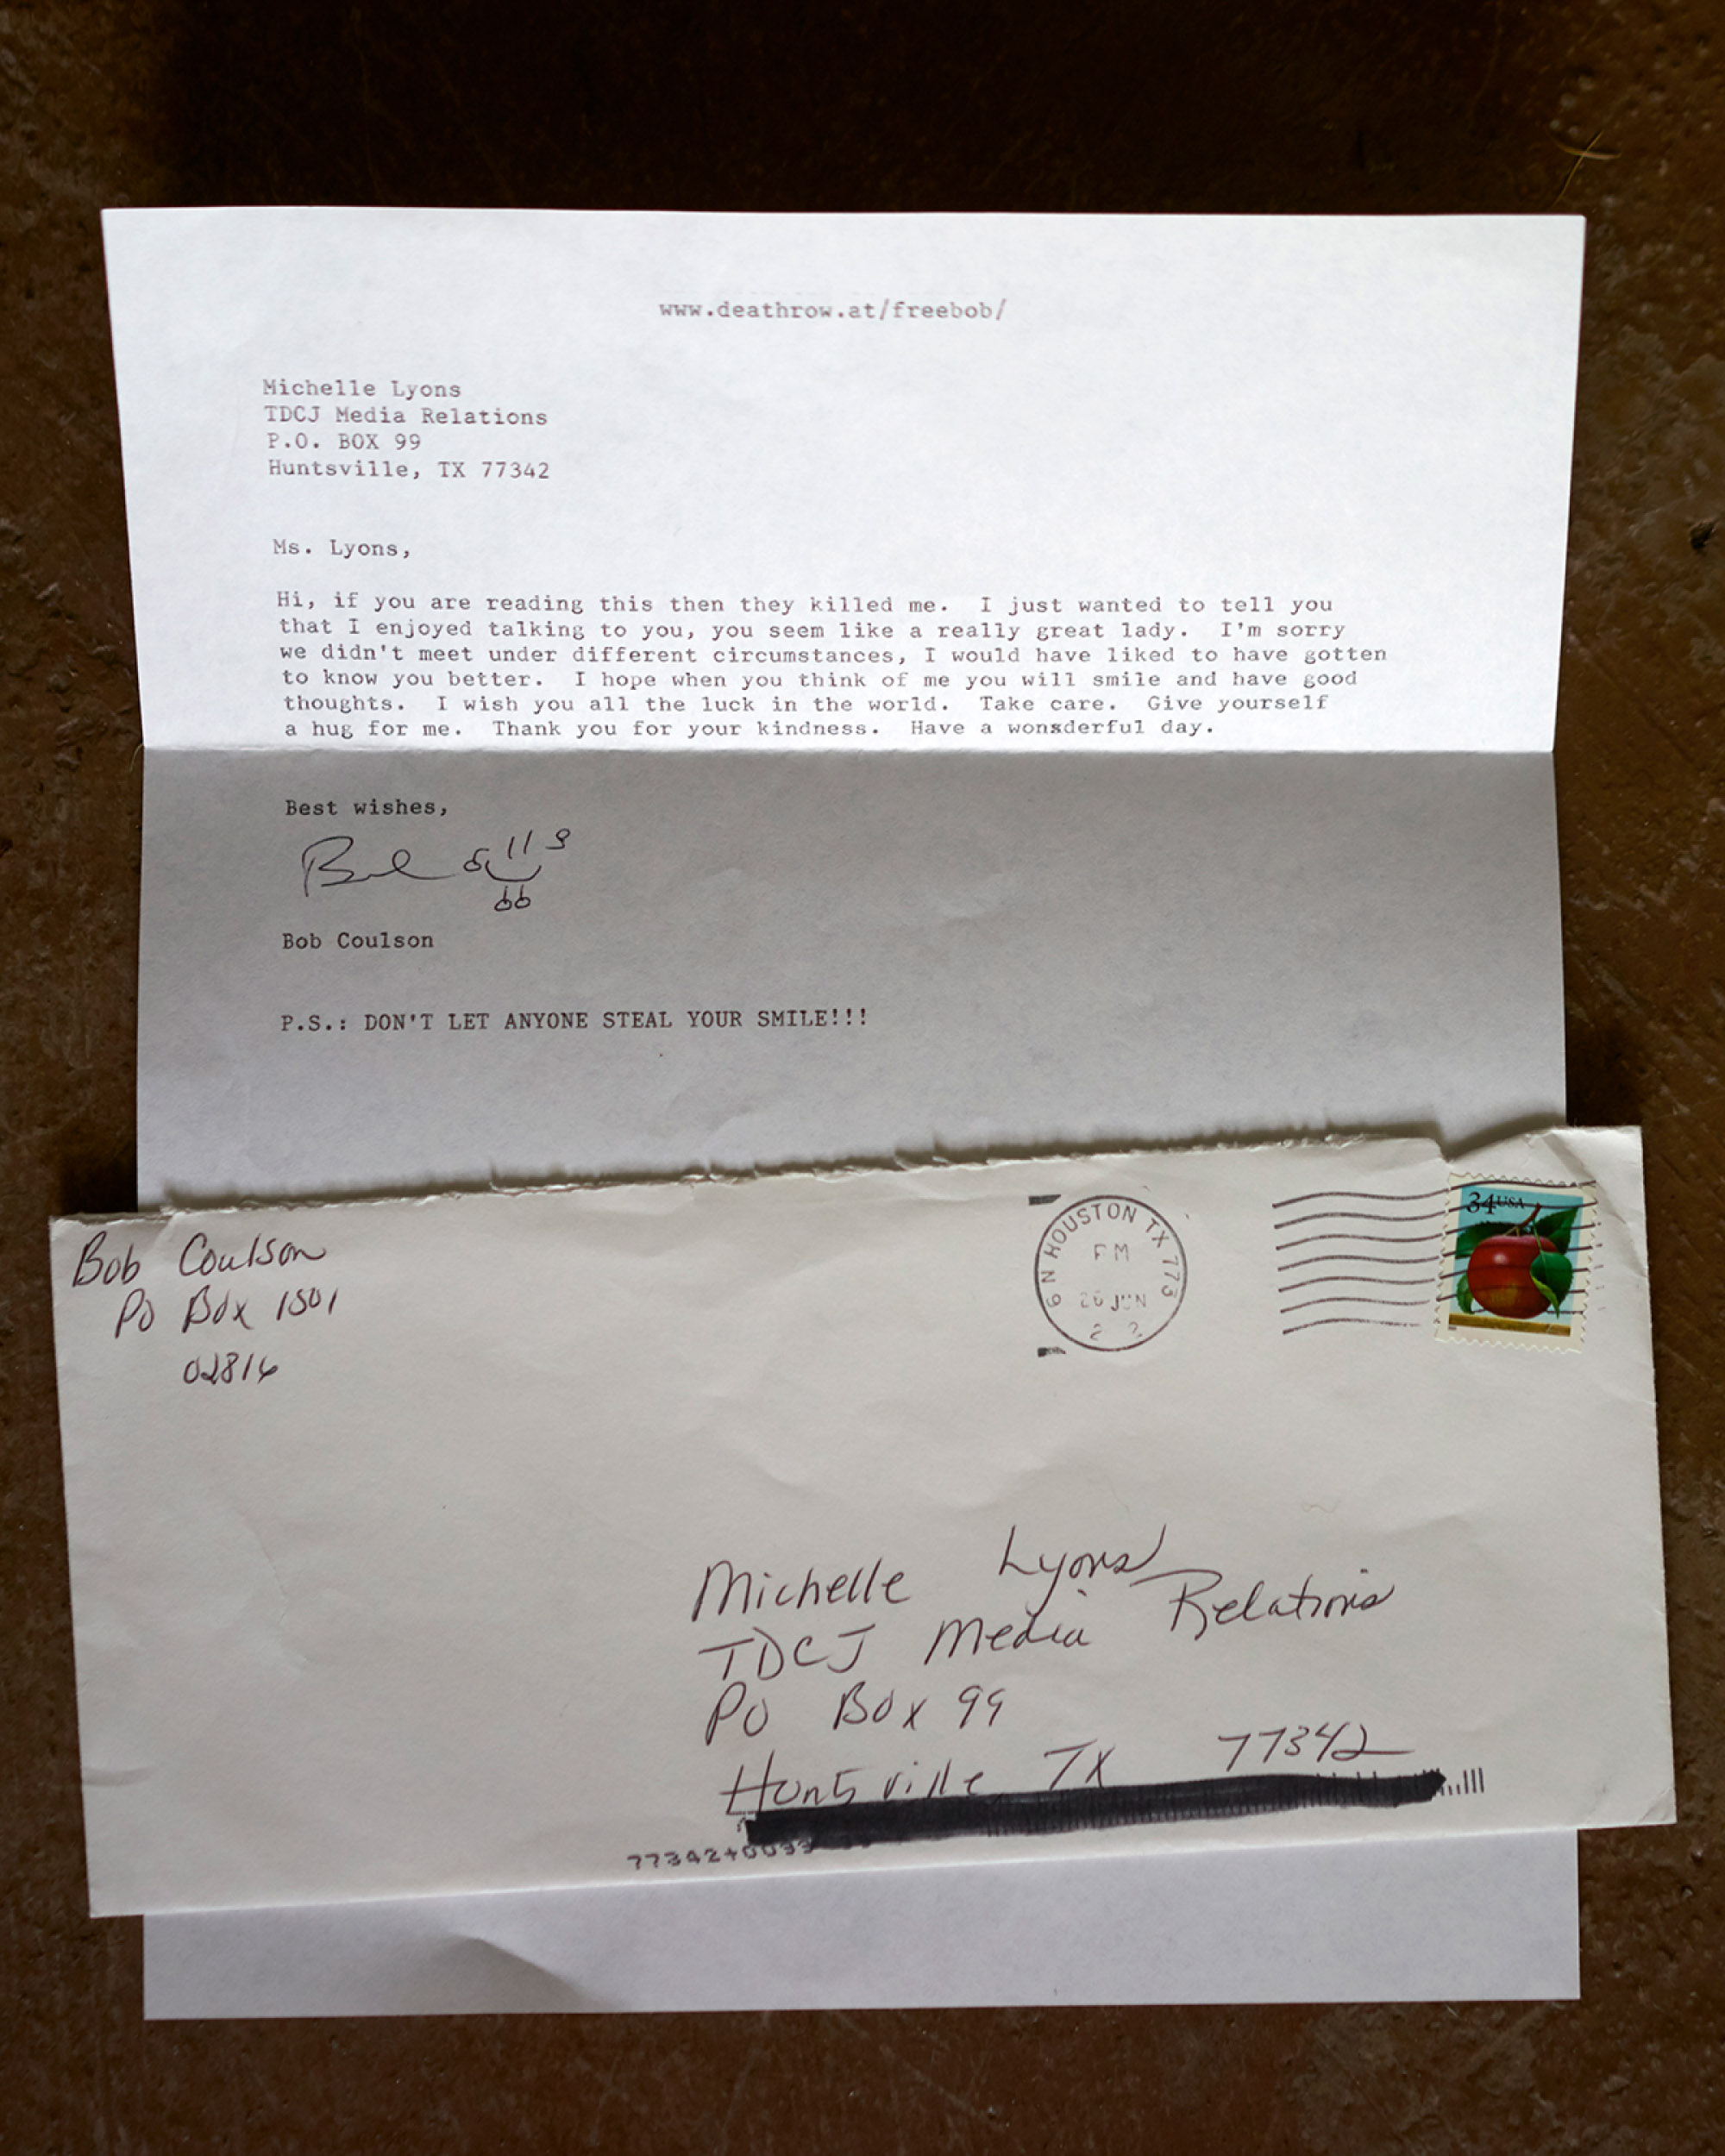 Written prior to his execution, a letter from inmate Robert Coulson to Michelle reads, “Hi, if you are reading this then they killed me. I just wanted to tell you that I enjoyed talking to you, you seem like a really great lady…I wish you all the luck in the world. Take care. Thank you for your kindness…”